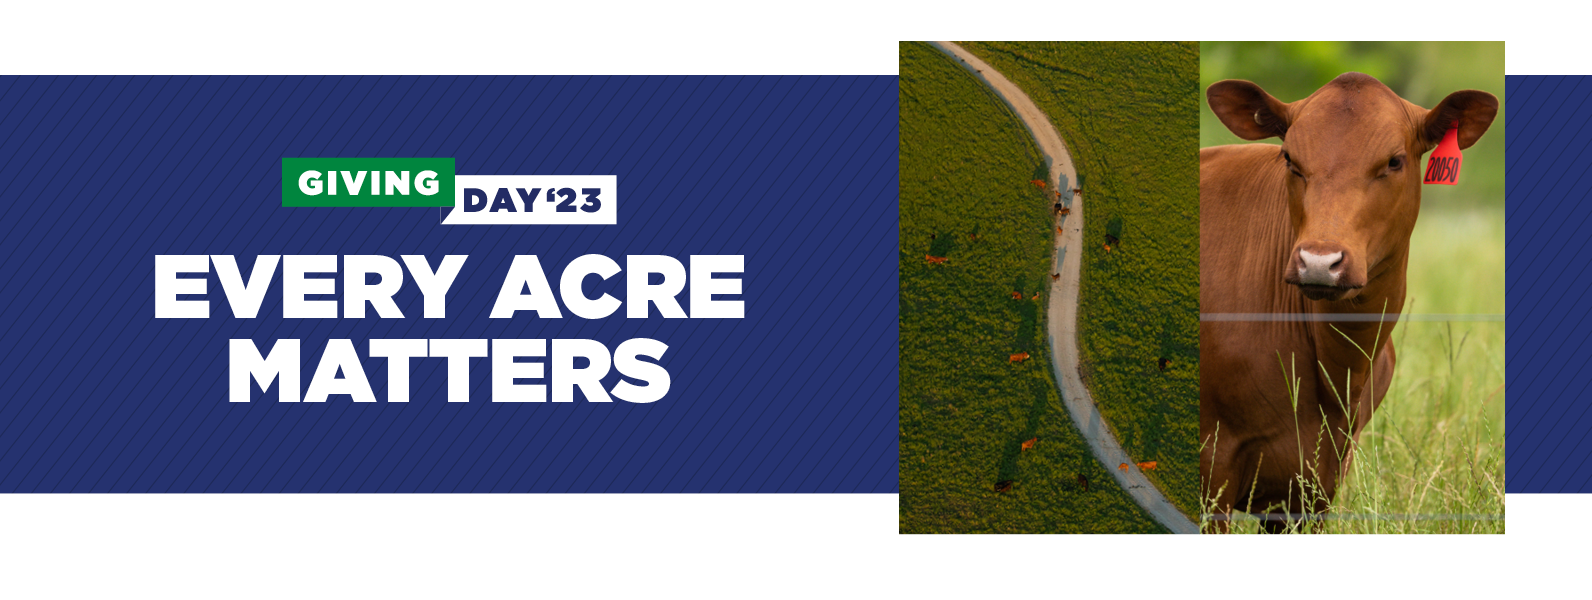 Giving Day ‘23 | Every Acre Matters